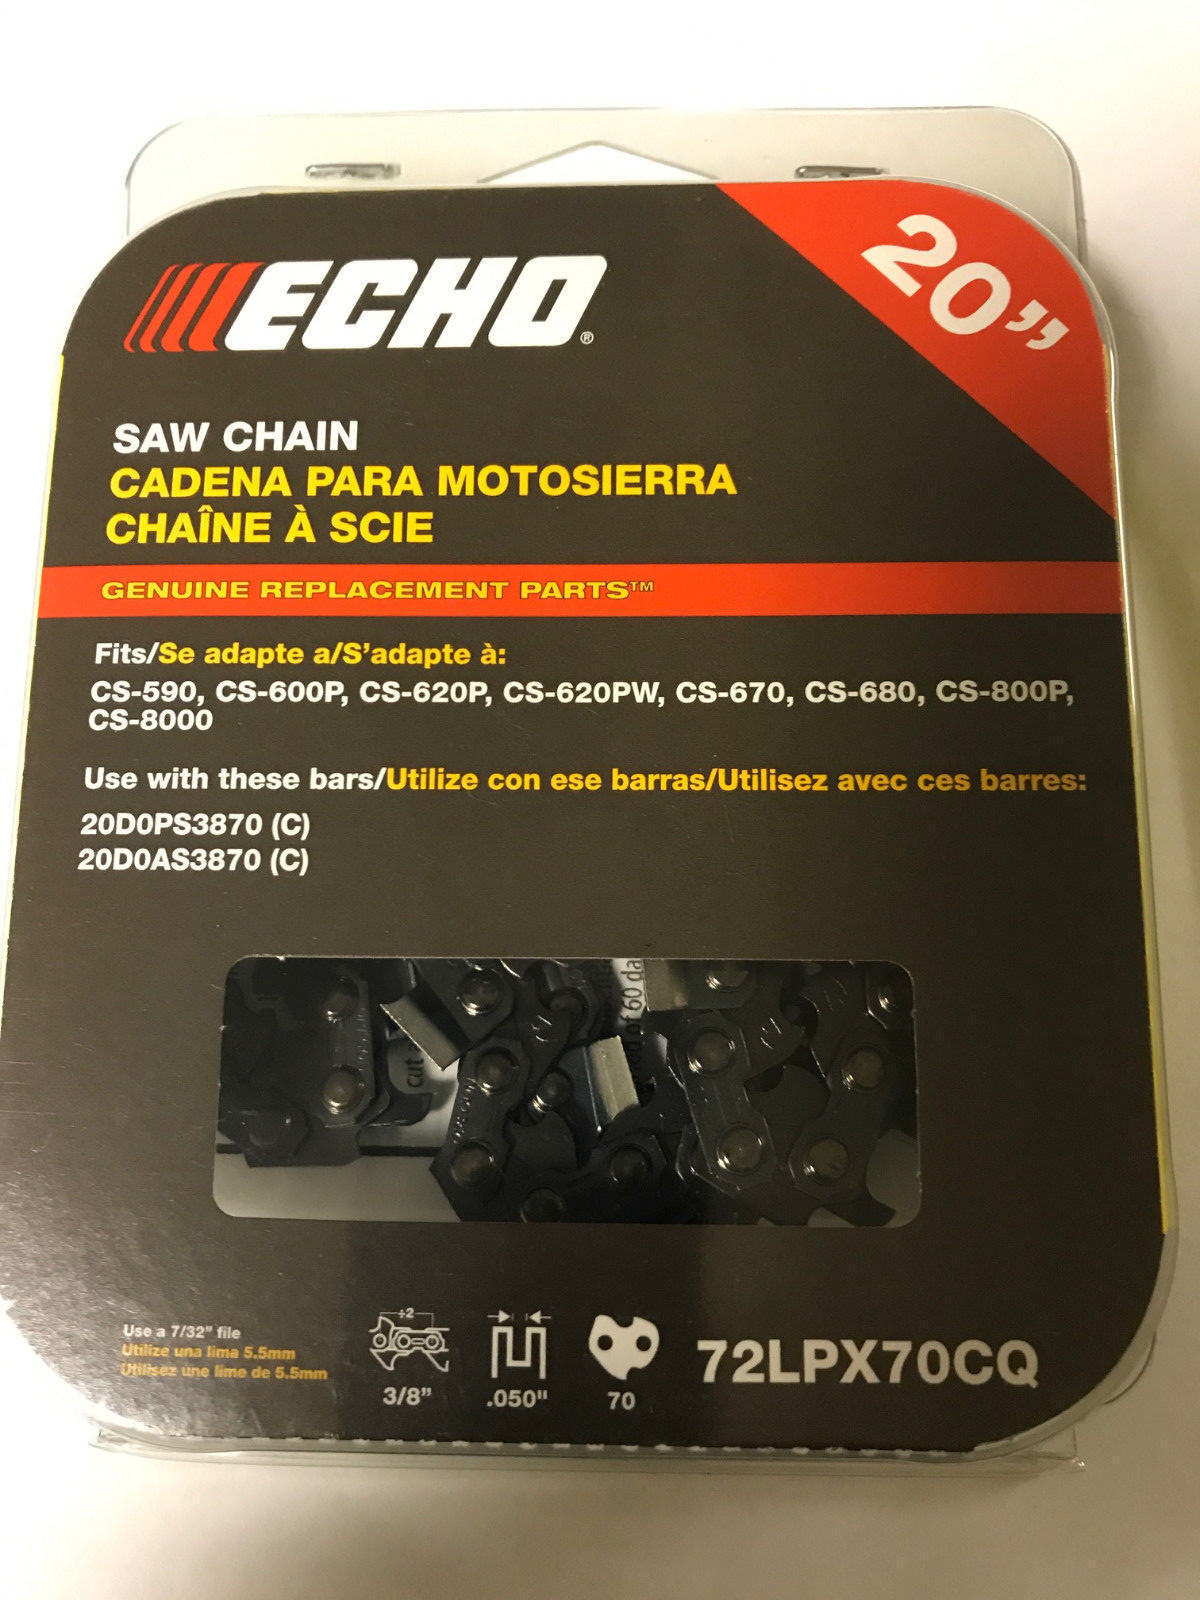 Primary image for 72LPX70CQ Echo OEM 20" Power Match Chainsaw Chain